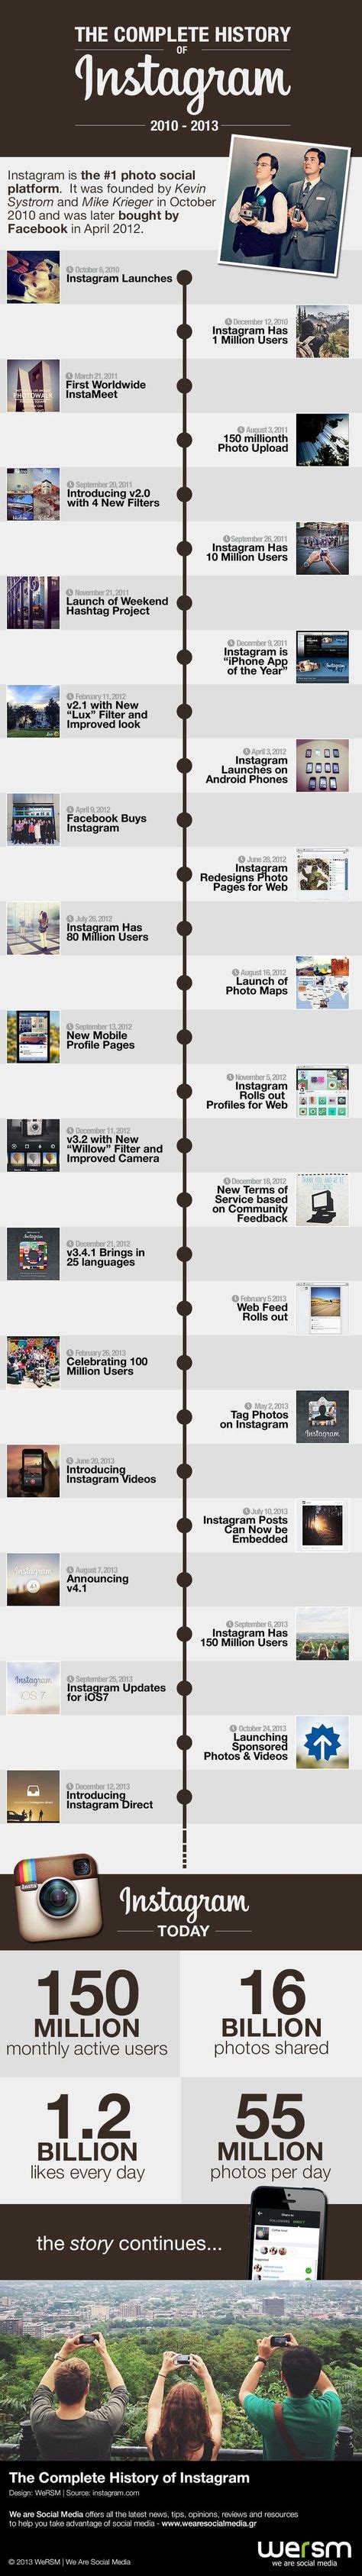 Timeline Of Instagram From 2010 To Present Infographic Instagram